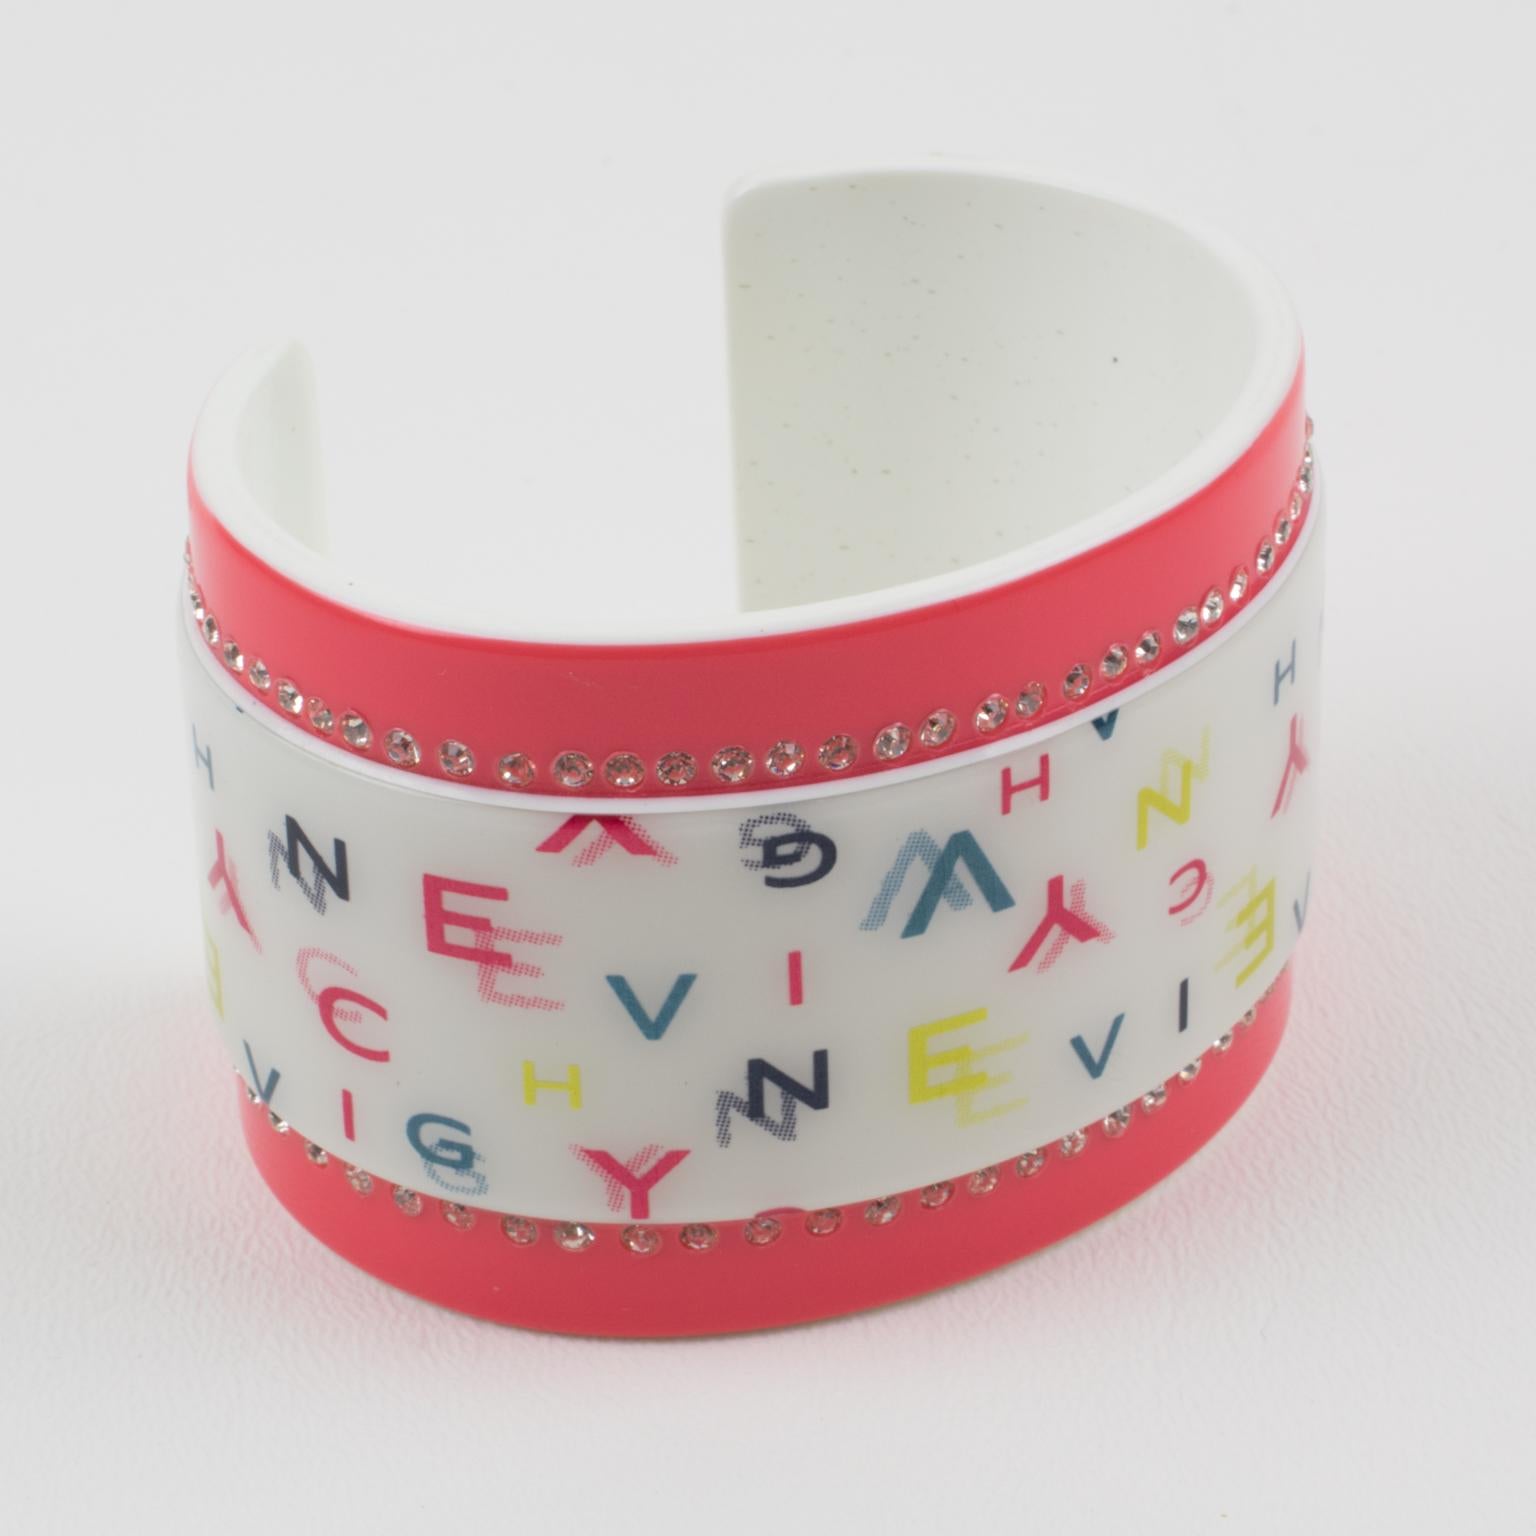 This stylish Givenchy Paris signed cuff bracelet features a massive cuff shape in white and pink salmon resin ornate with multicolor 